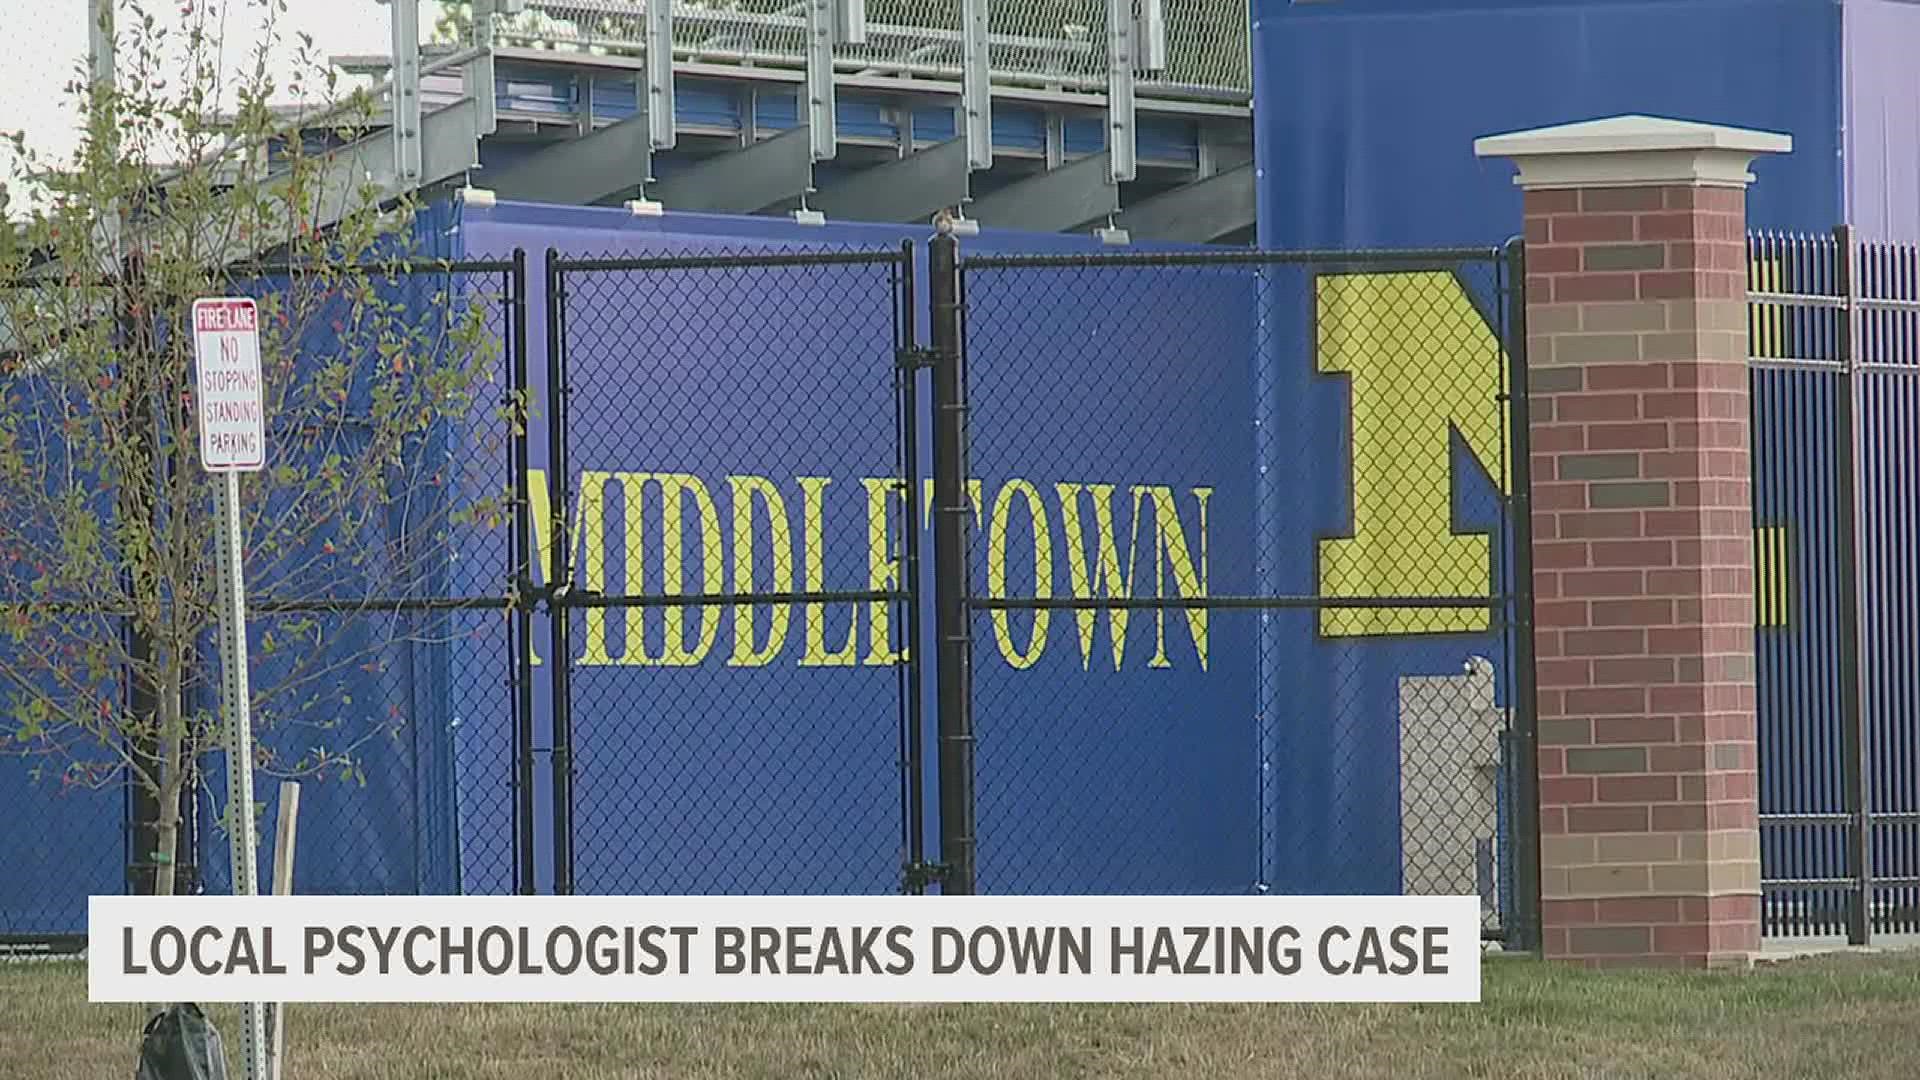 As the investigation into the football team continues, one psychologist breaks down why hazing incidents occur among students.